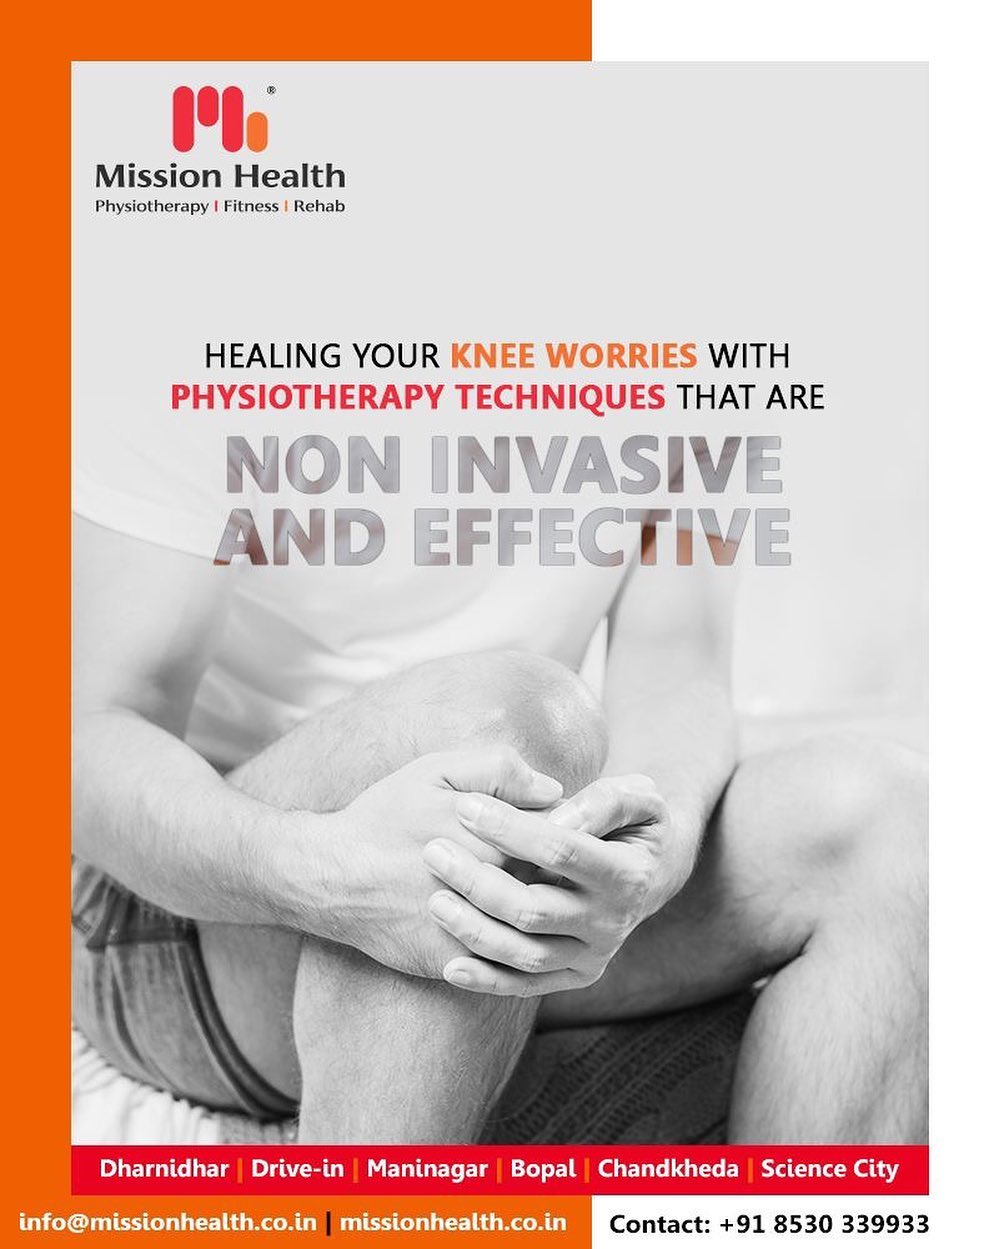 Get a fresh dimension of life by getting your knee worries healed at Mission Health!

#MissionHealth #MissionHealthIndia #physiotherapy #AbilityClinic #MovementIsLife #Rehab #BestPhysiotherapy #NonSurgicalPainManagement #KneeRehab #KneeTreatment #SuperSpecialityKneeClinic #360DegreeApproach